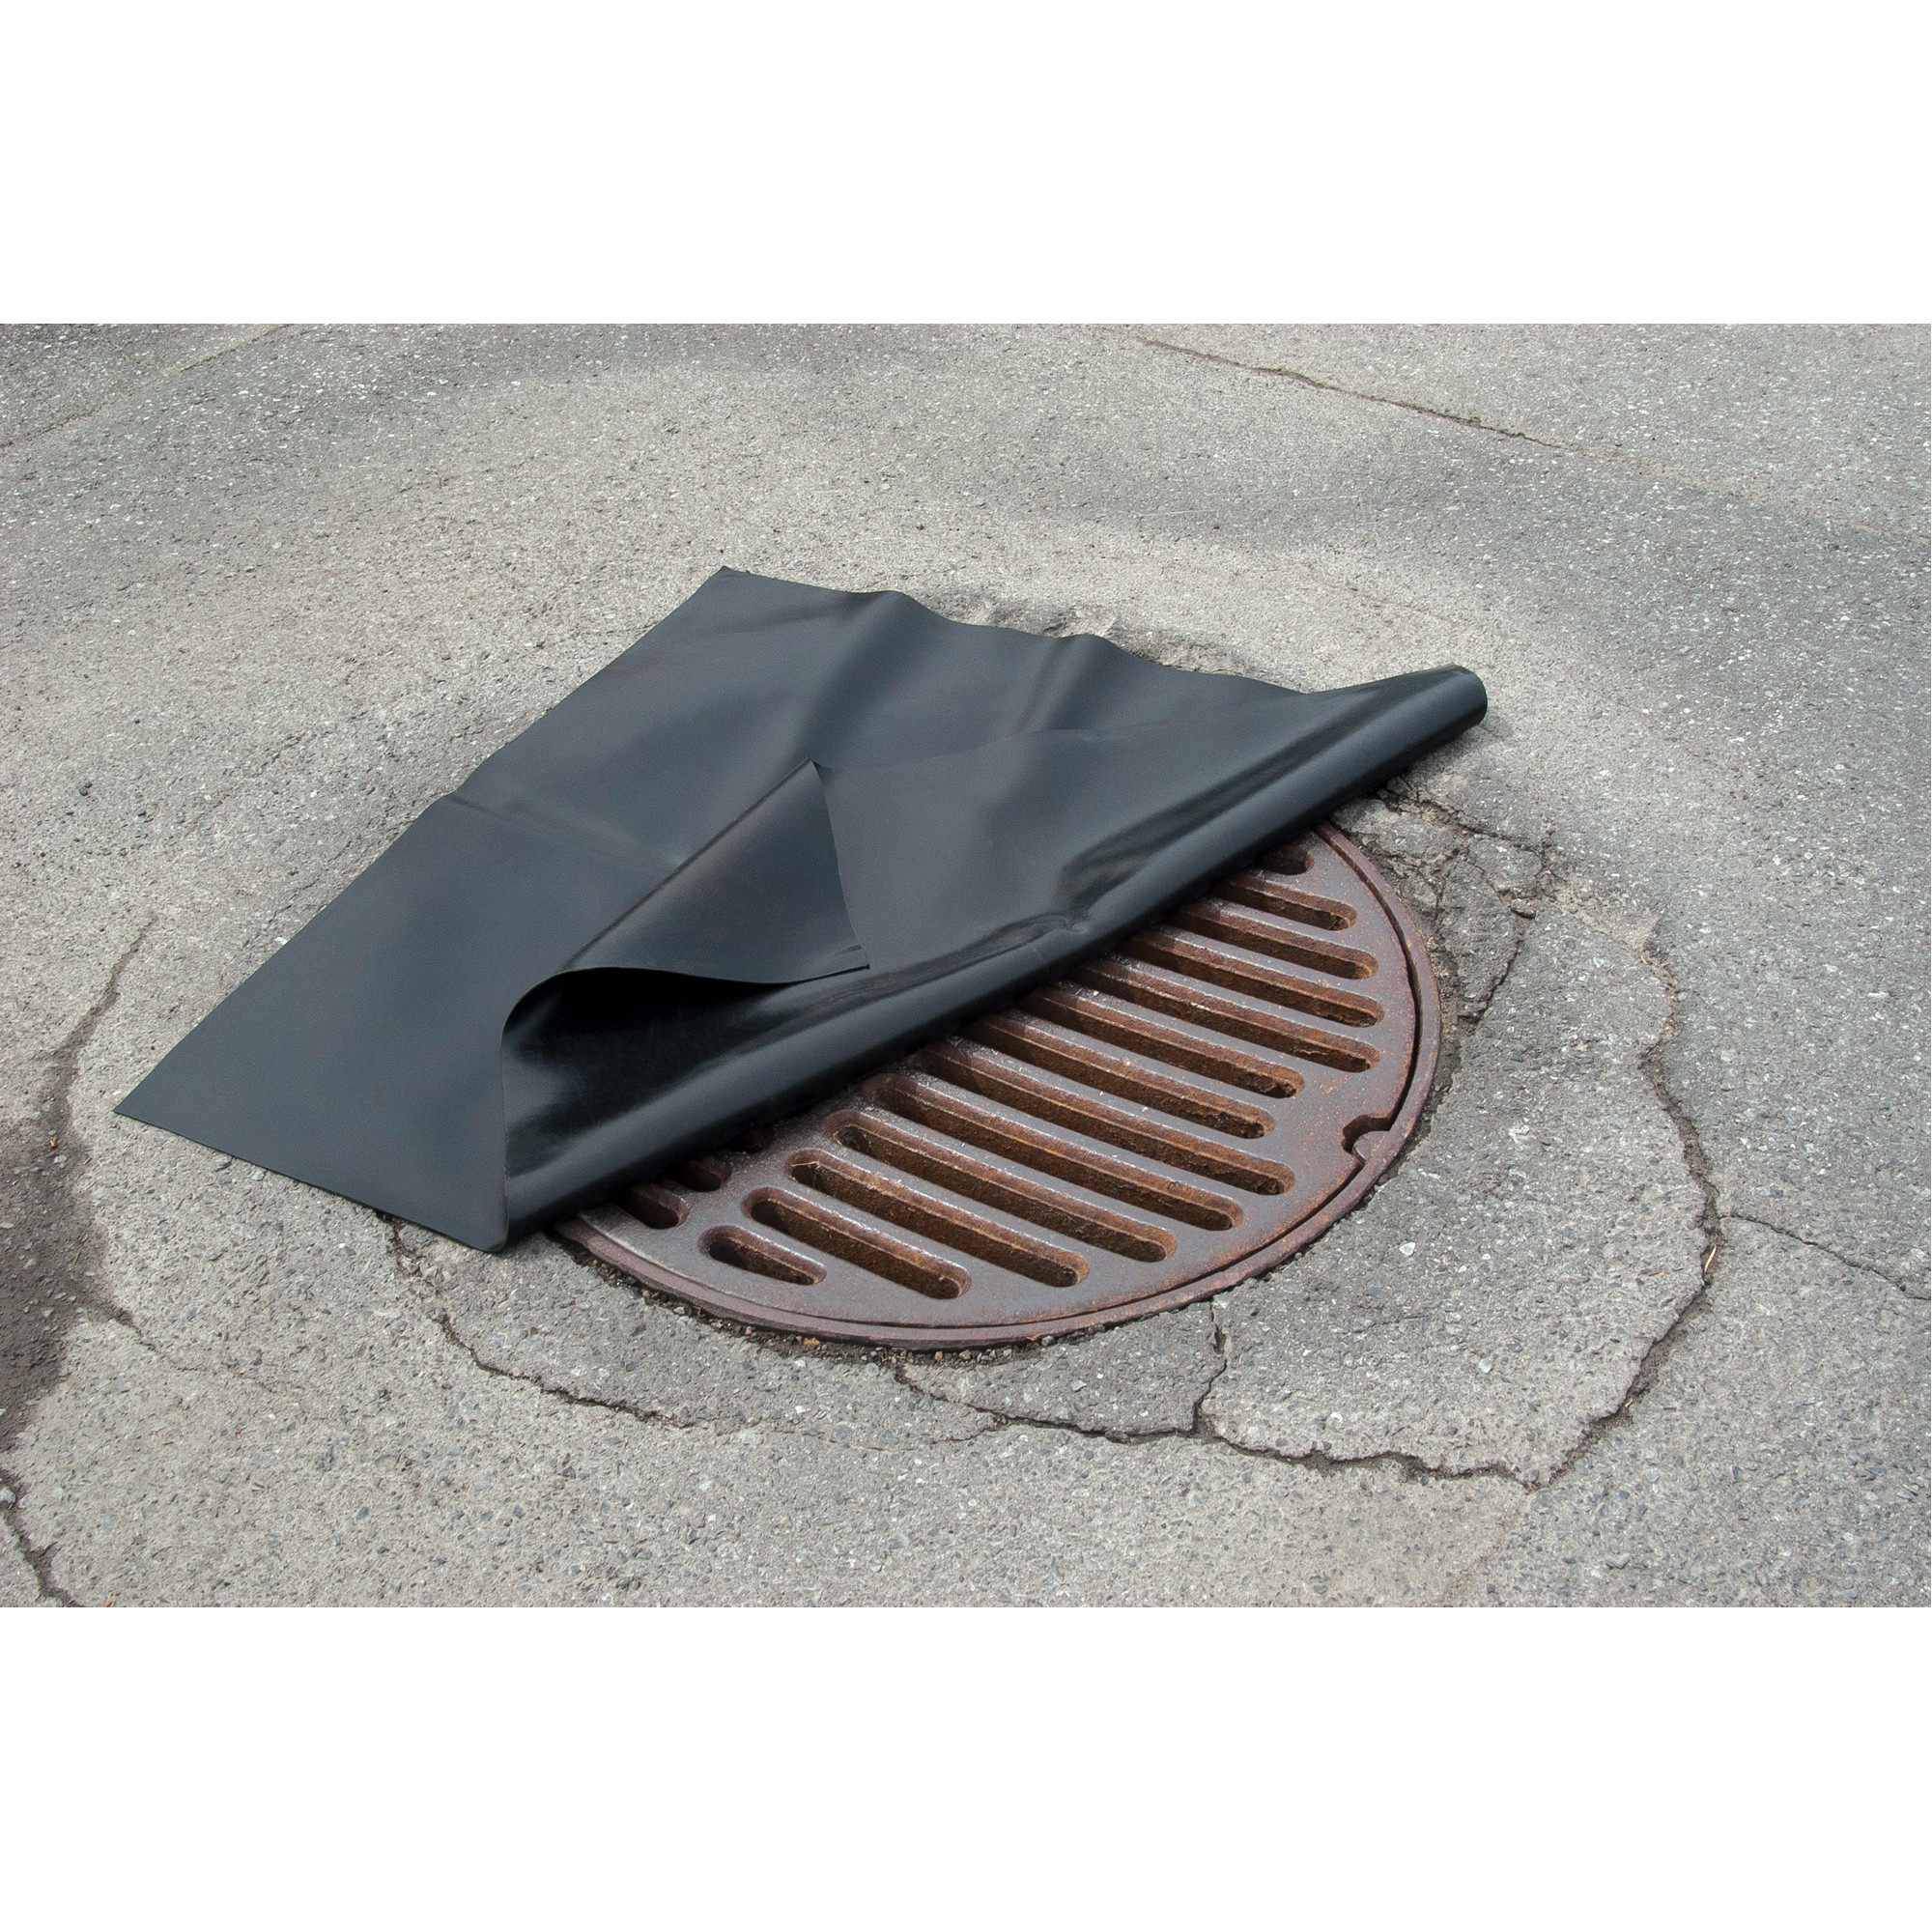 https://media.sylprotec.com/20425/neoprene-canvas-for-storm-sewer-dimension-36-x-36-x-14.jpg